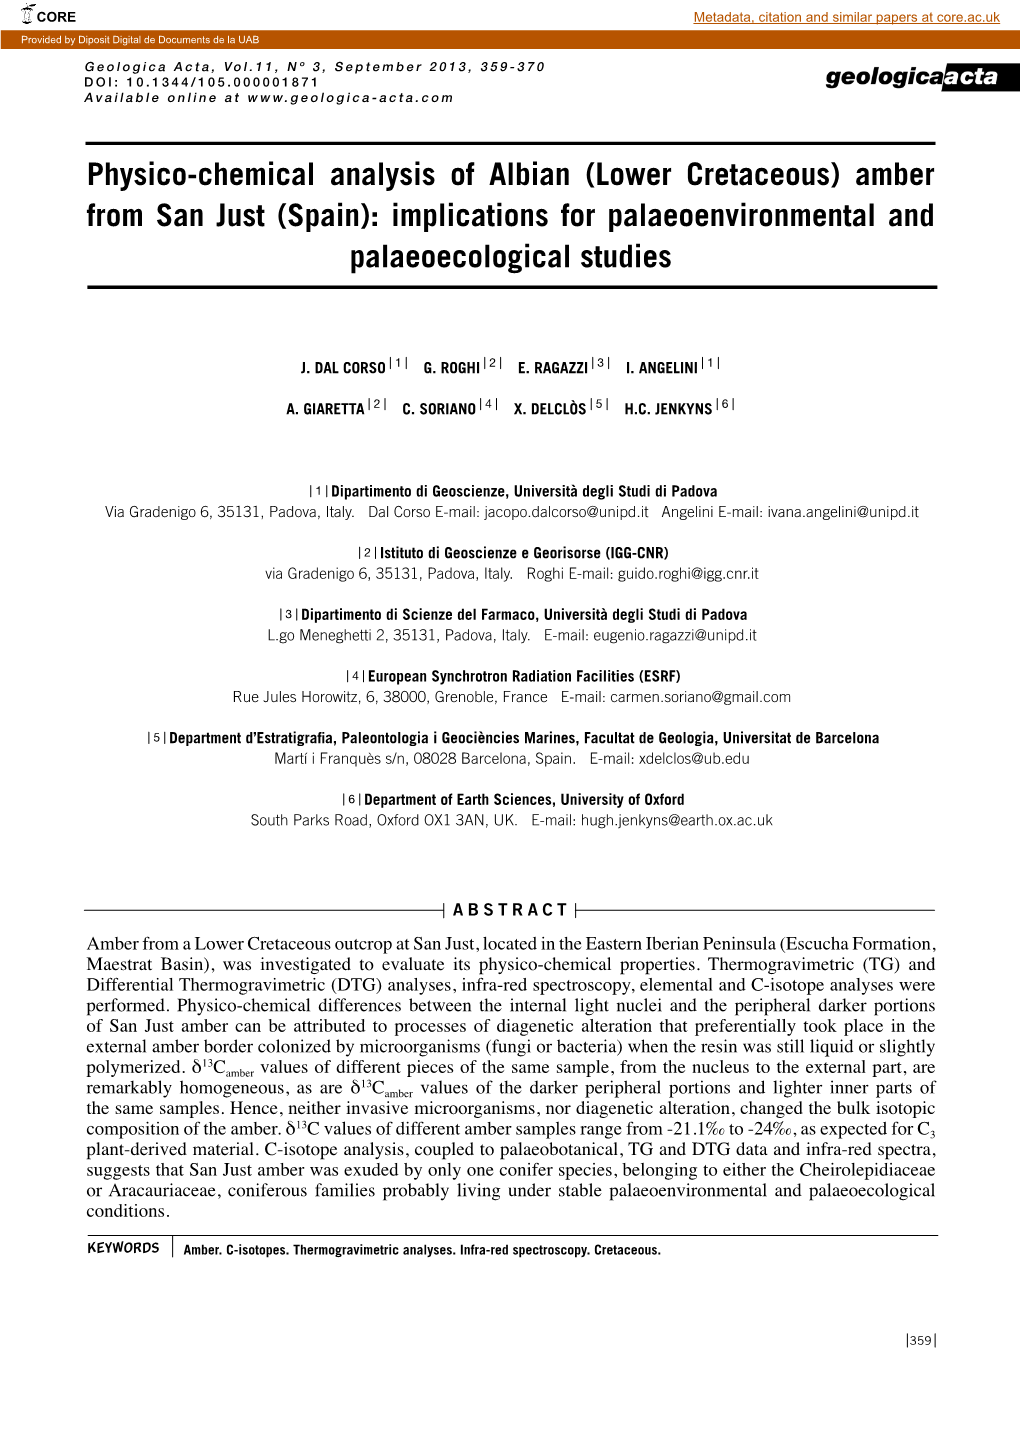 Amber from San Just (Spain): Implications for Palaeoenvironmental and Palaeoecological Studies